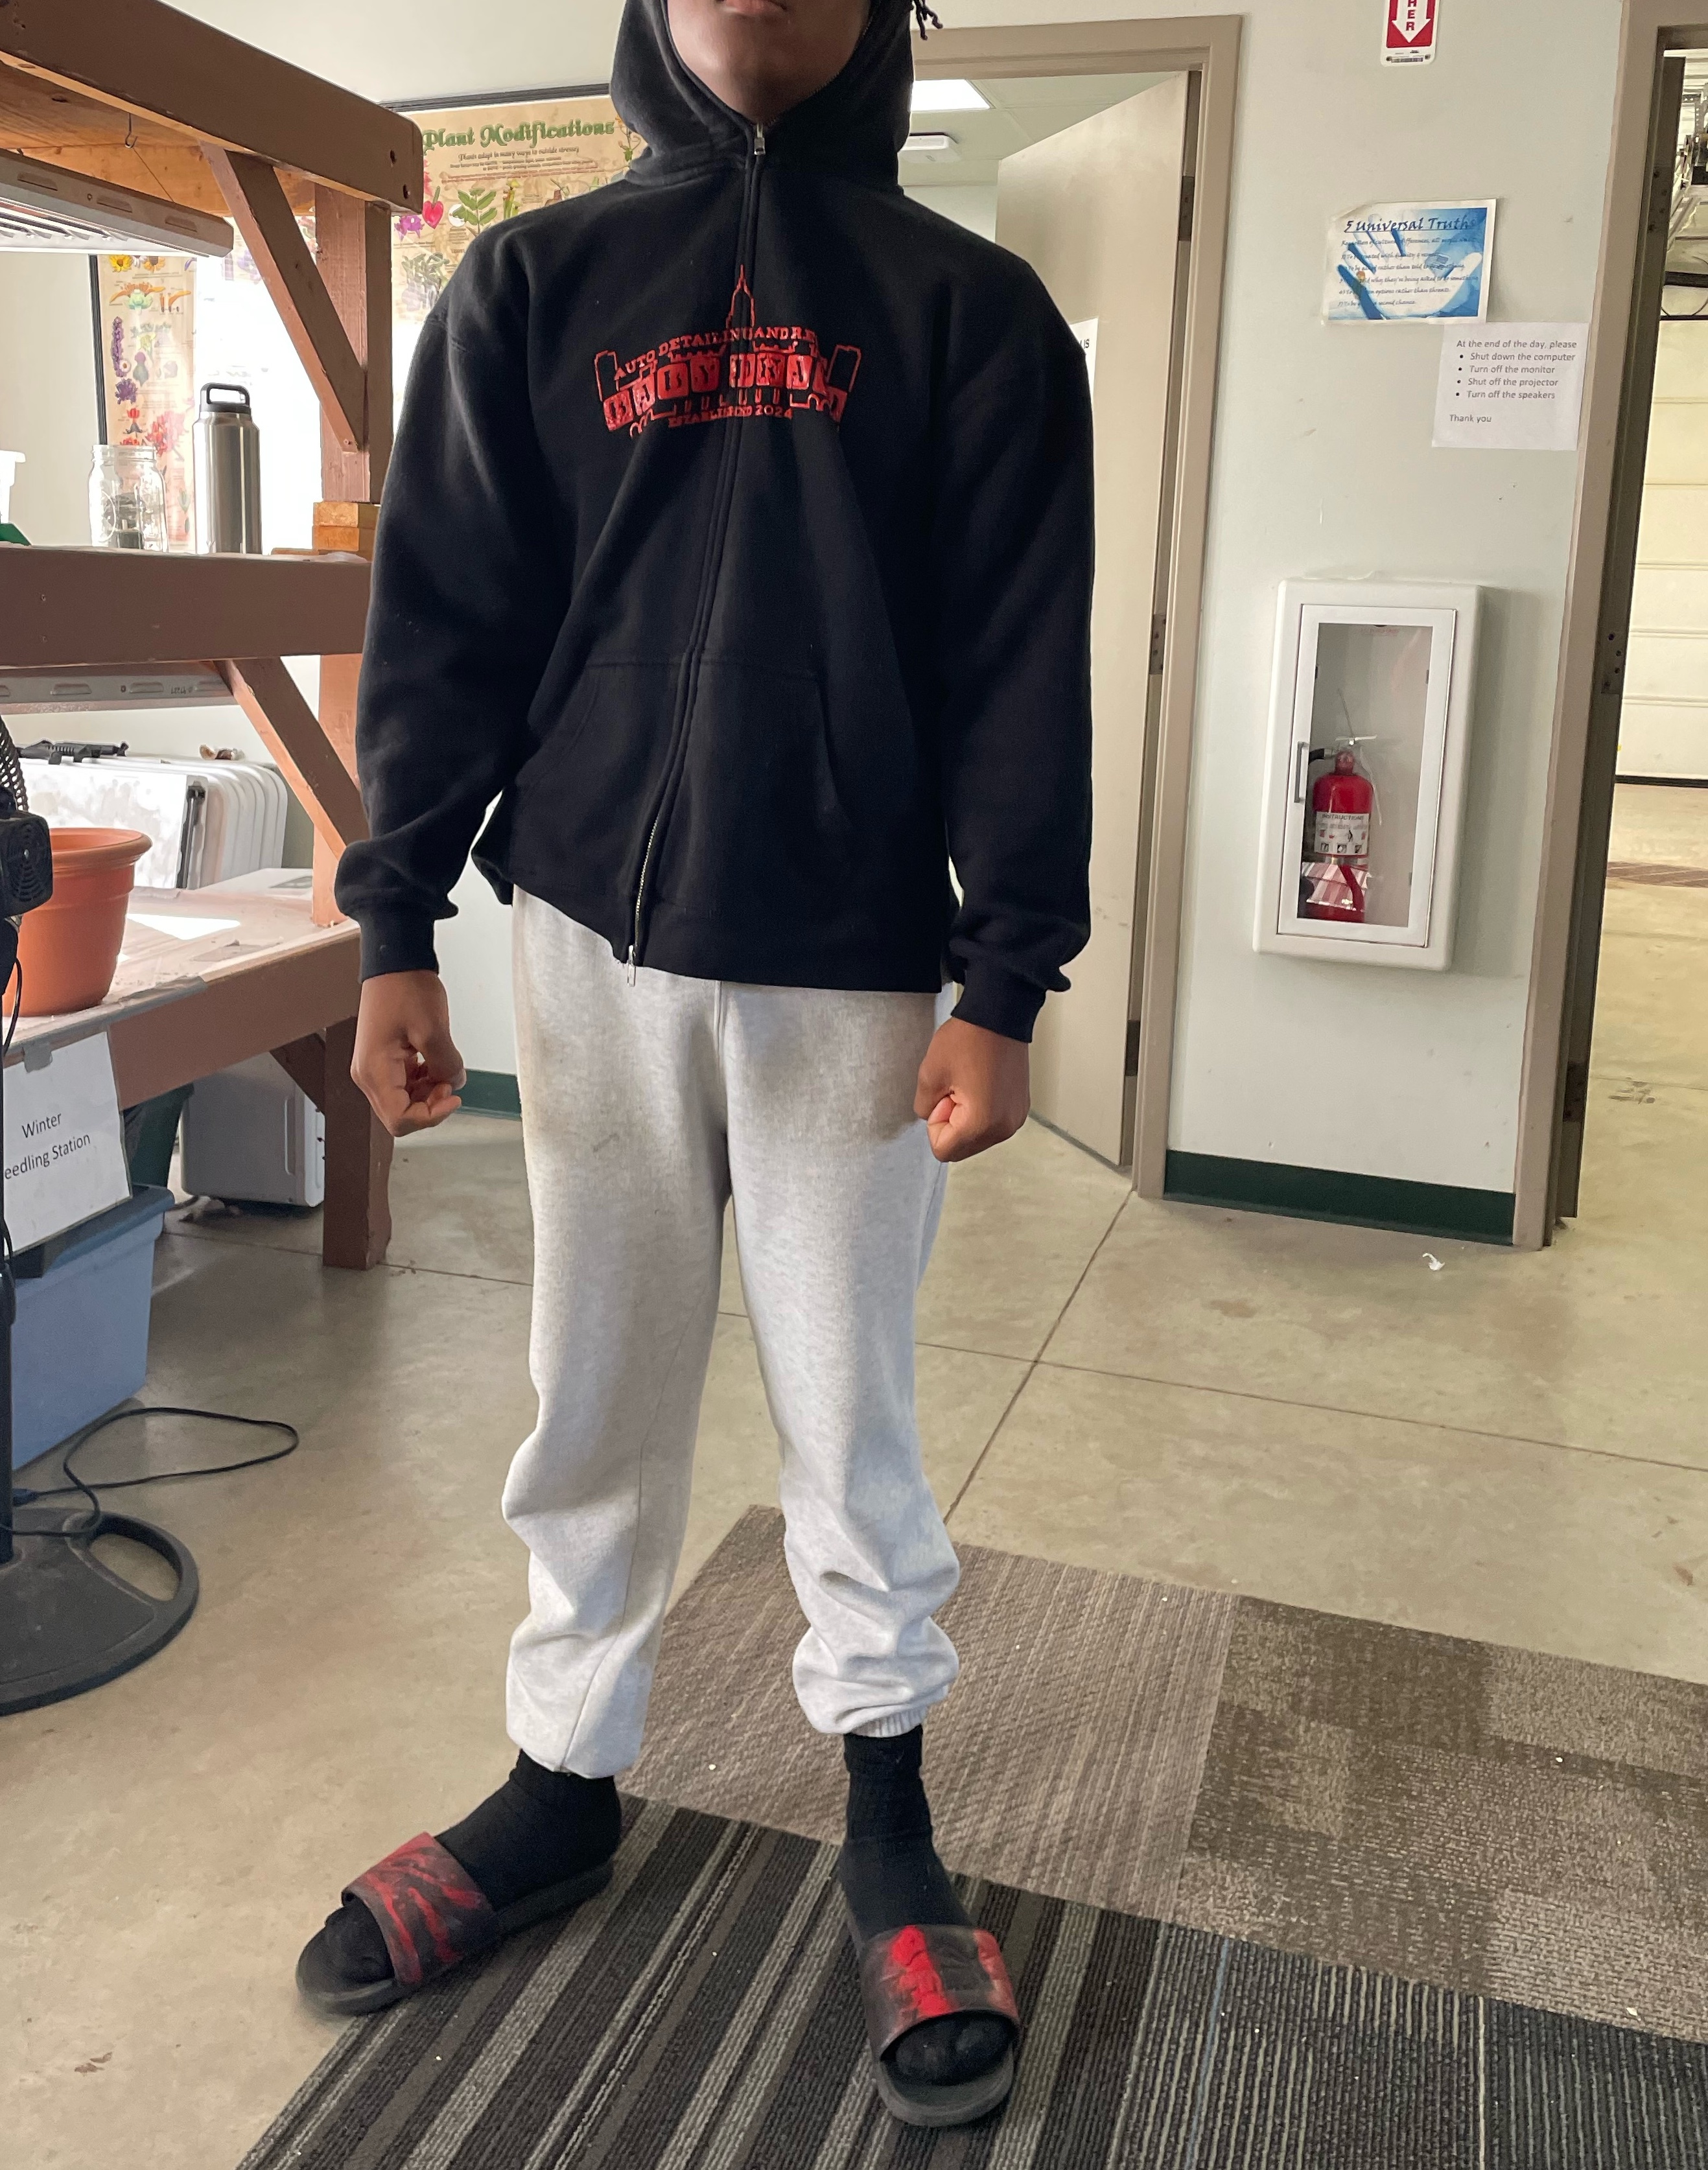 Student posing with their new branded sweatshirt and hydro-dipped slides